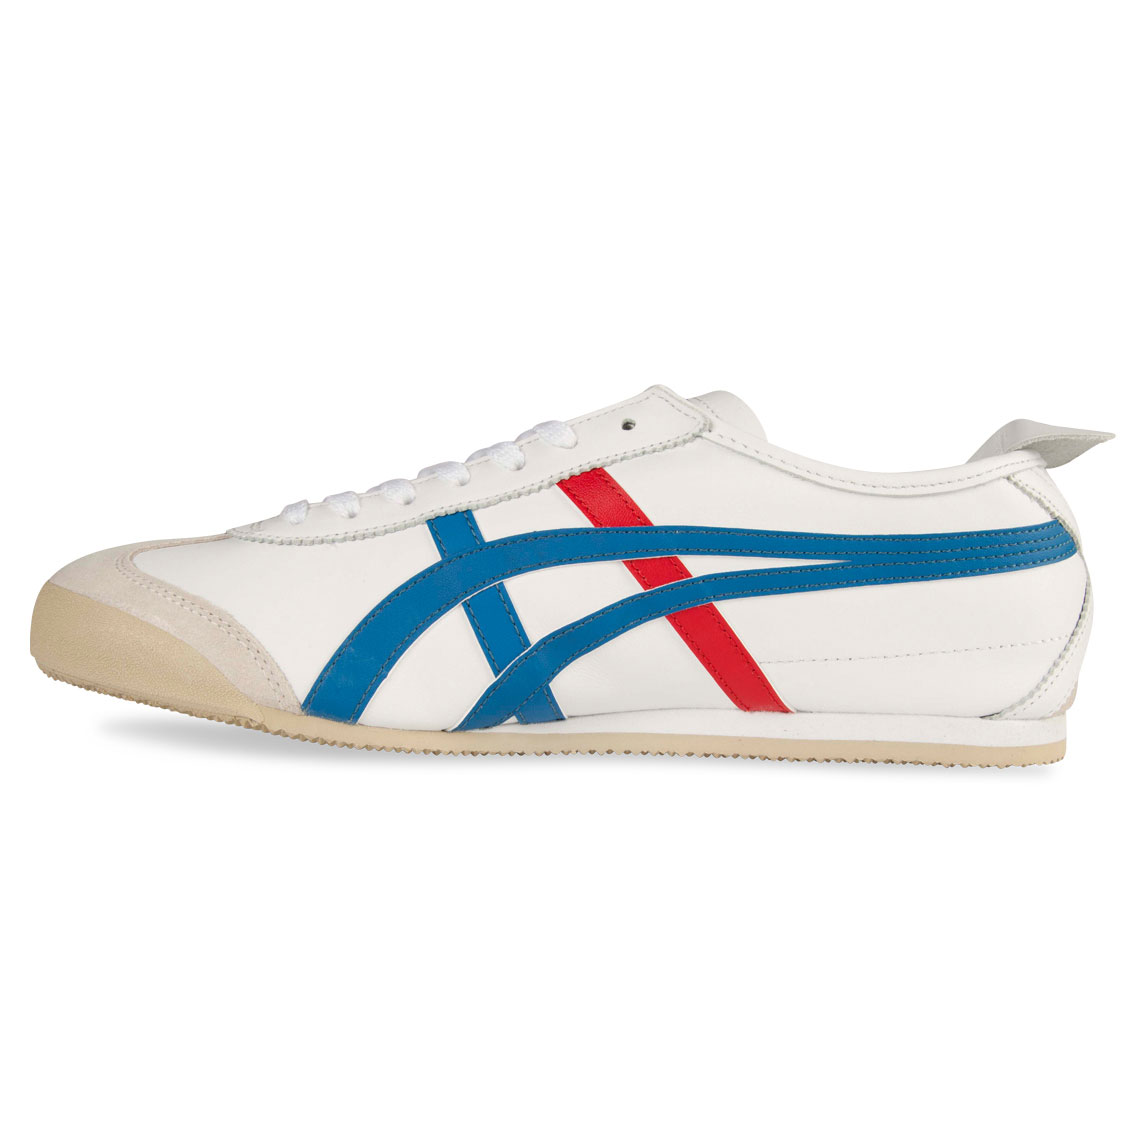 Onitsuka Tiger MEXICO 66 White/Blue/Red | Hype DC